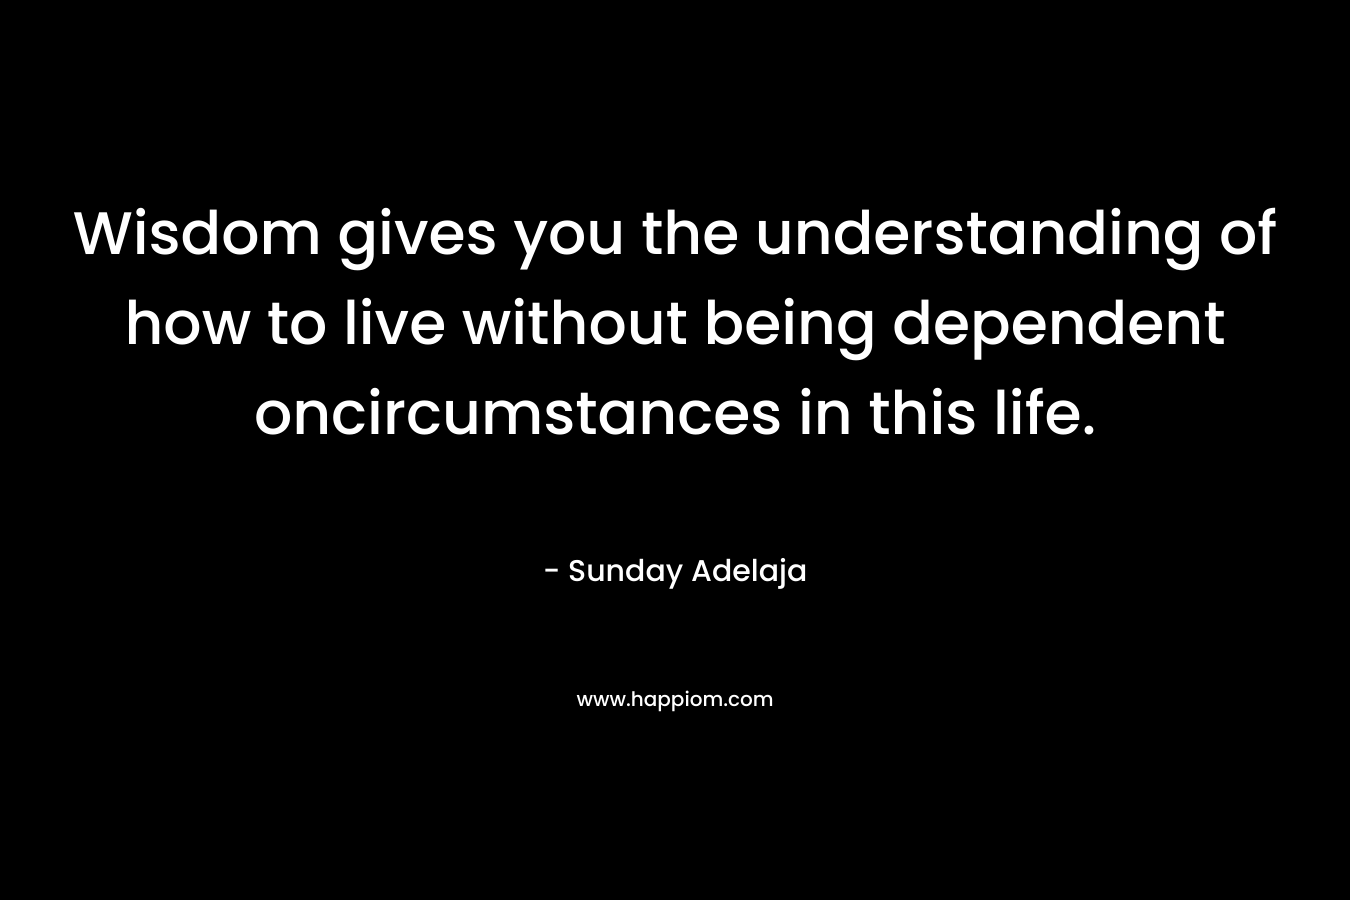 Wisdom gives you the understanding of how to live without being dependent oncircumstances in this life.